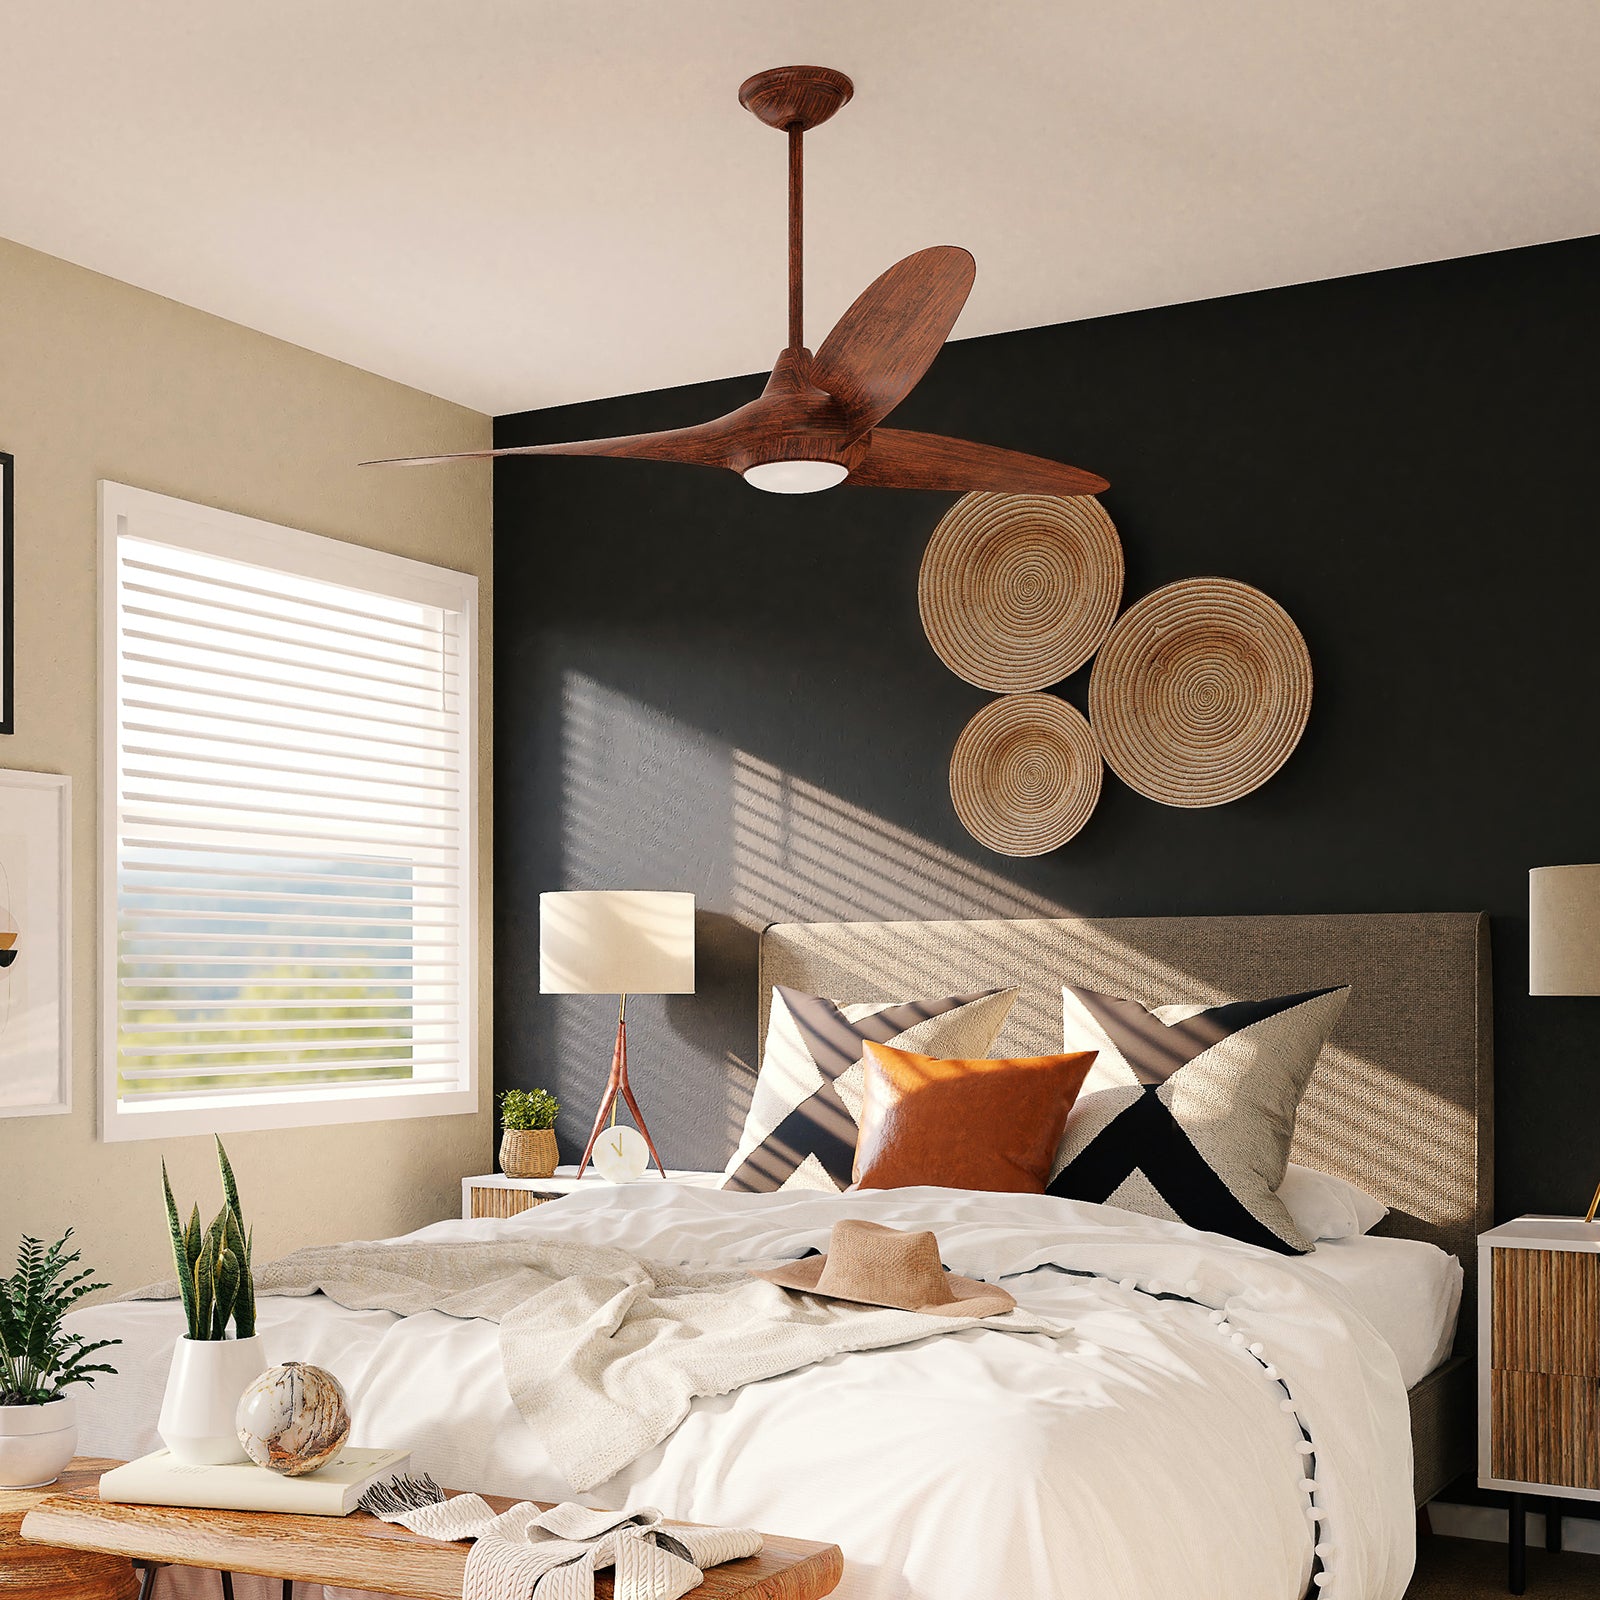 10 FAQs about Ceiling Fans in Summer